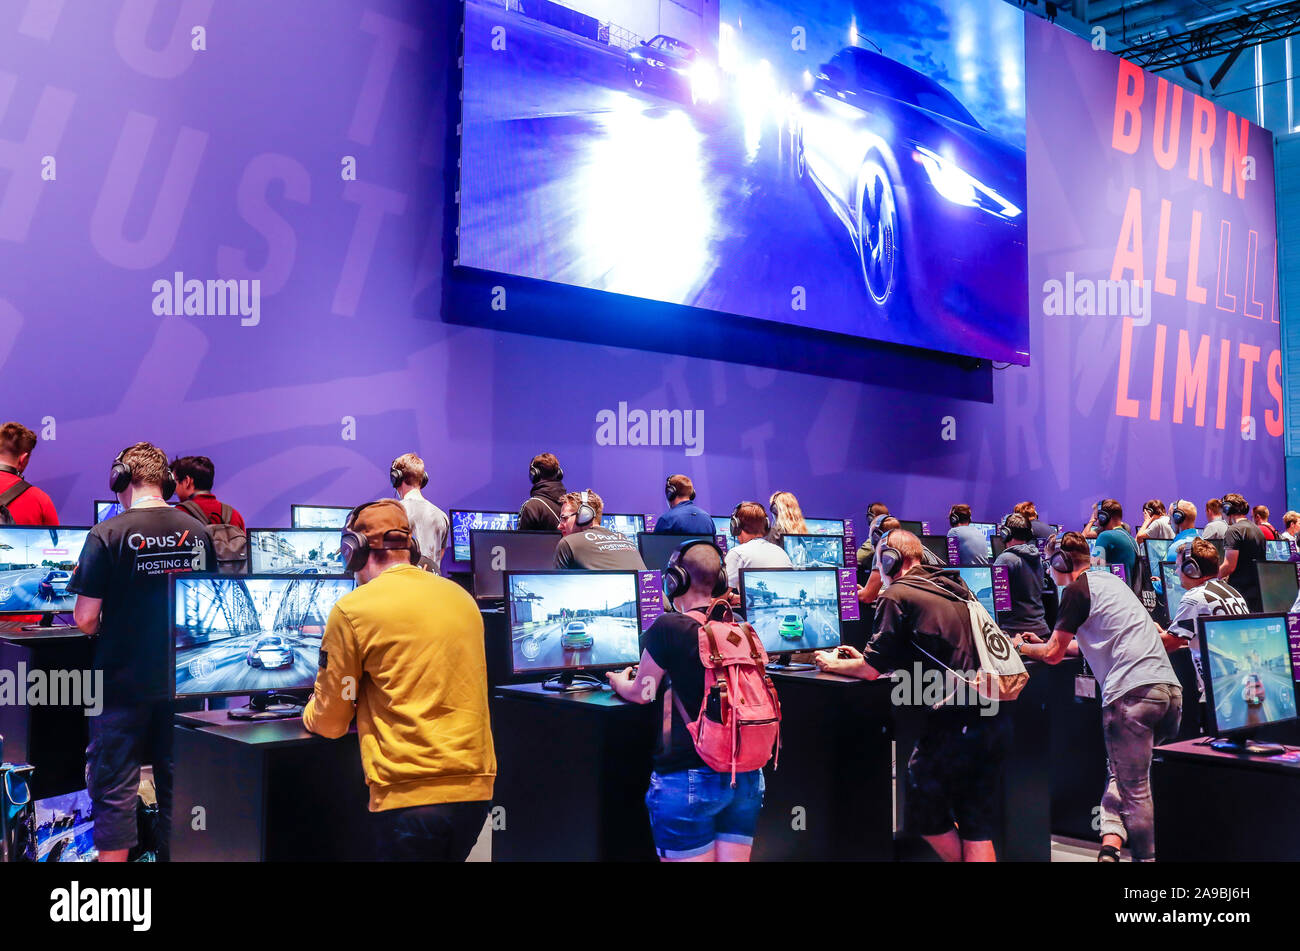 20.08.2019, Cologne, North Rhine-Westphalia, Germany - Gamescom, trade fair visitors play the computer game NFS Heat, racing game Need for Speed Heat Stock Photo